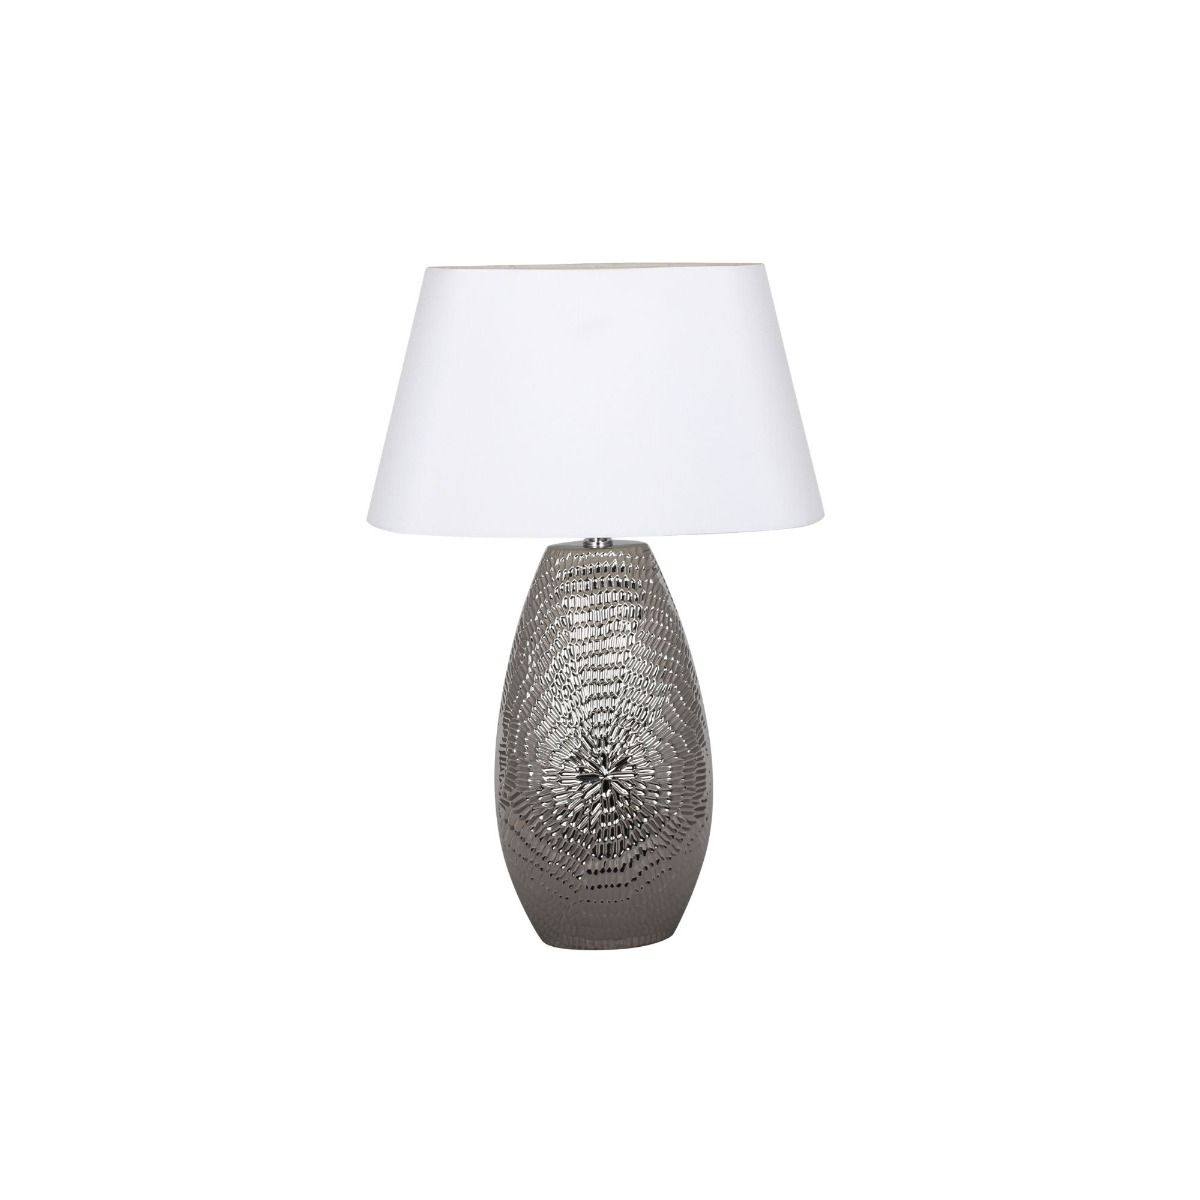 Caitlin Silver Oval Table Lamp 1 Light Silver With White Shade